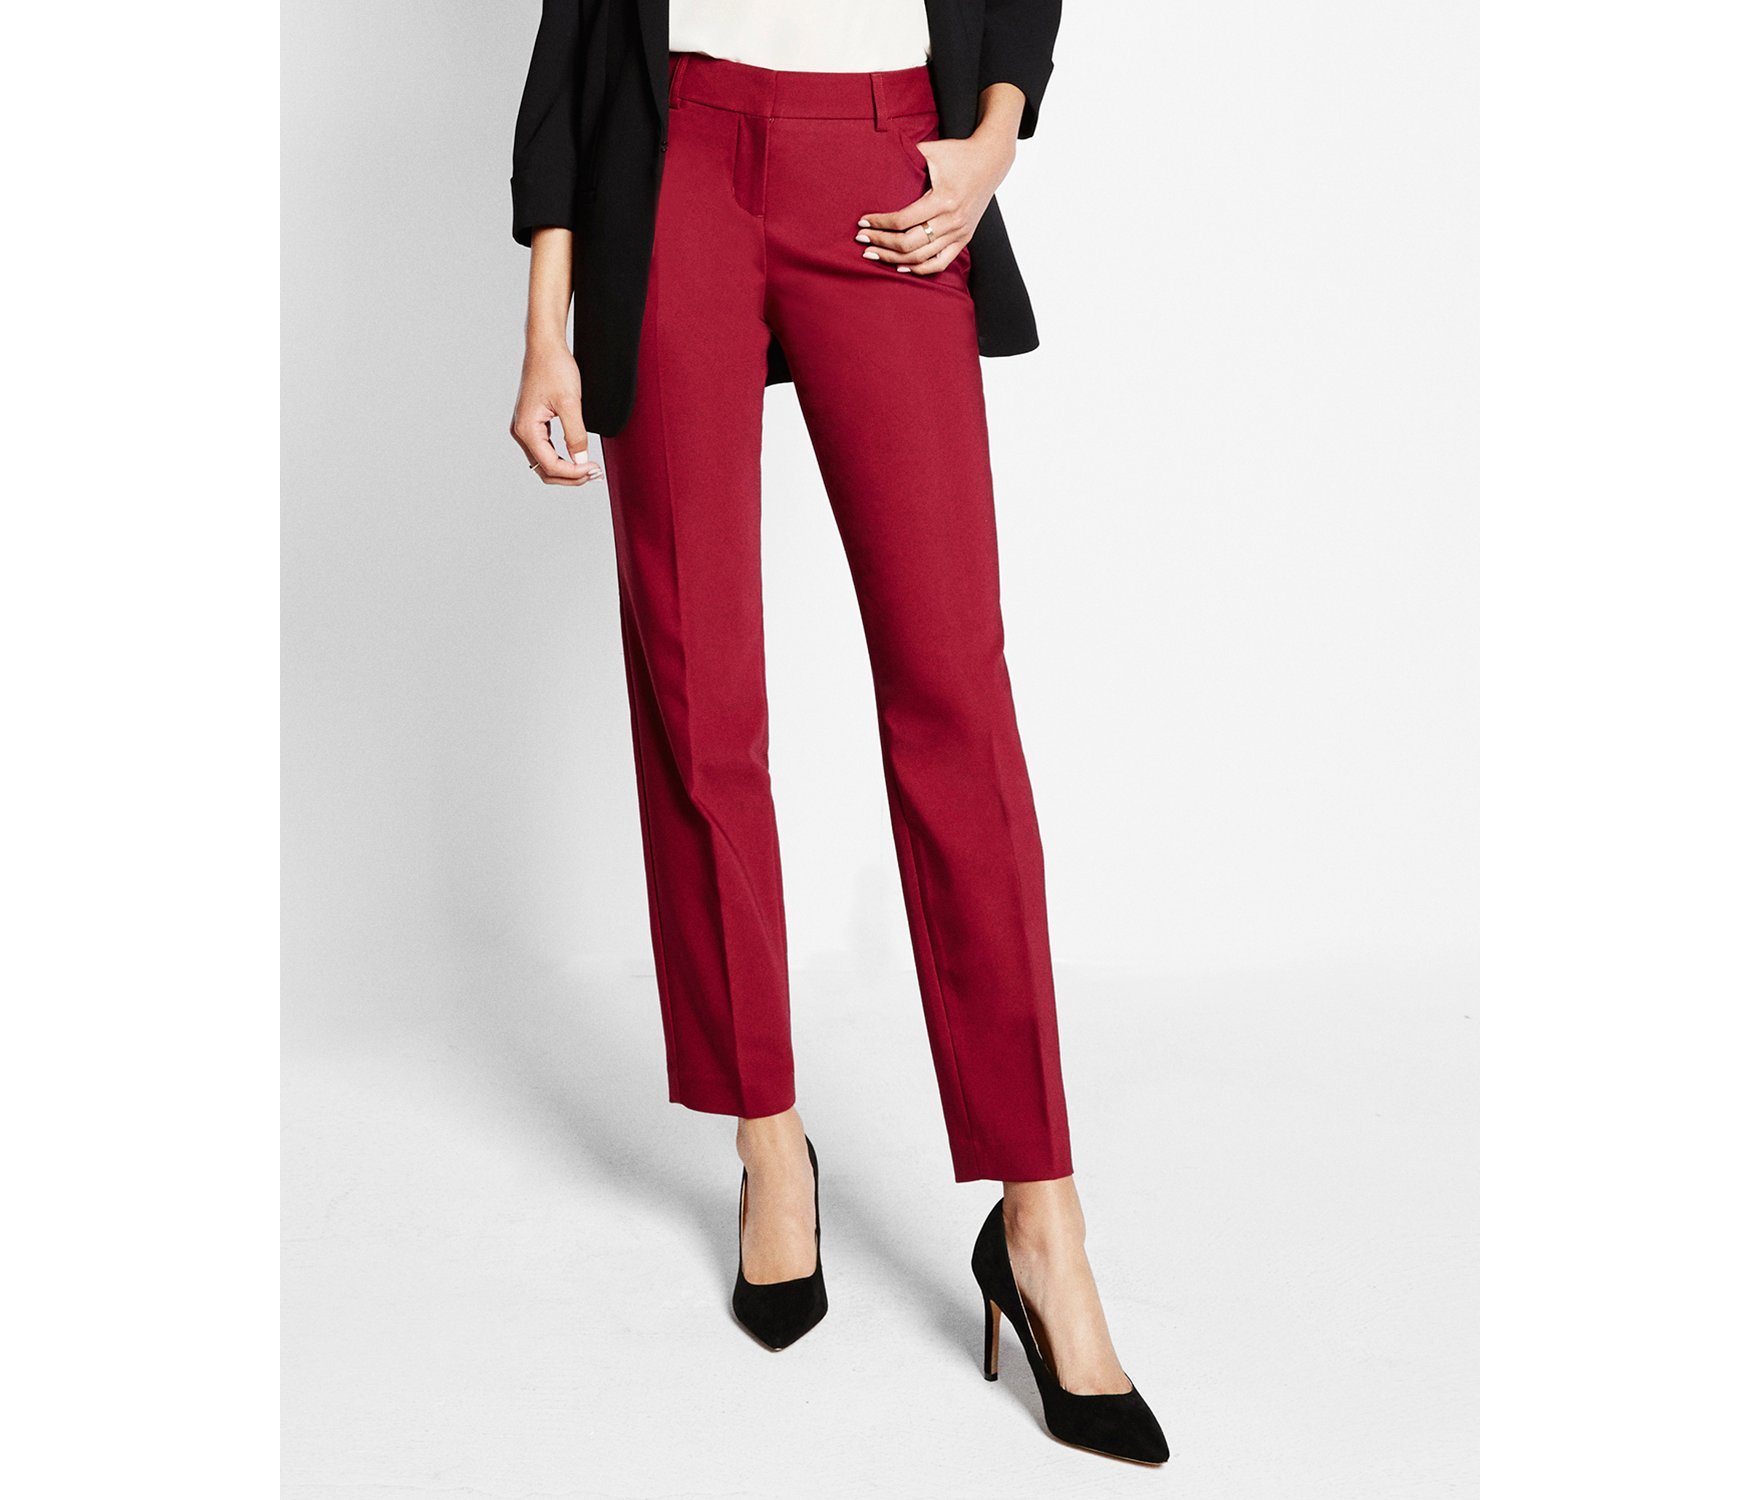 White Jacket and Editor Ankle Pant Suit | Express